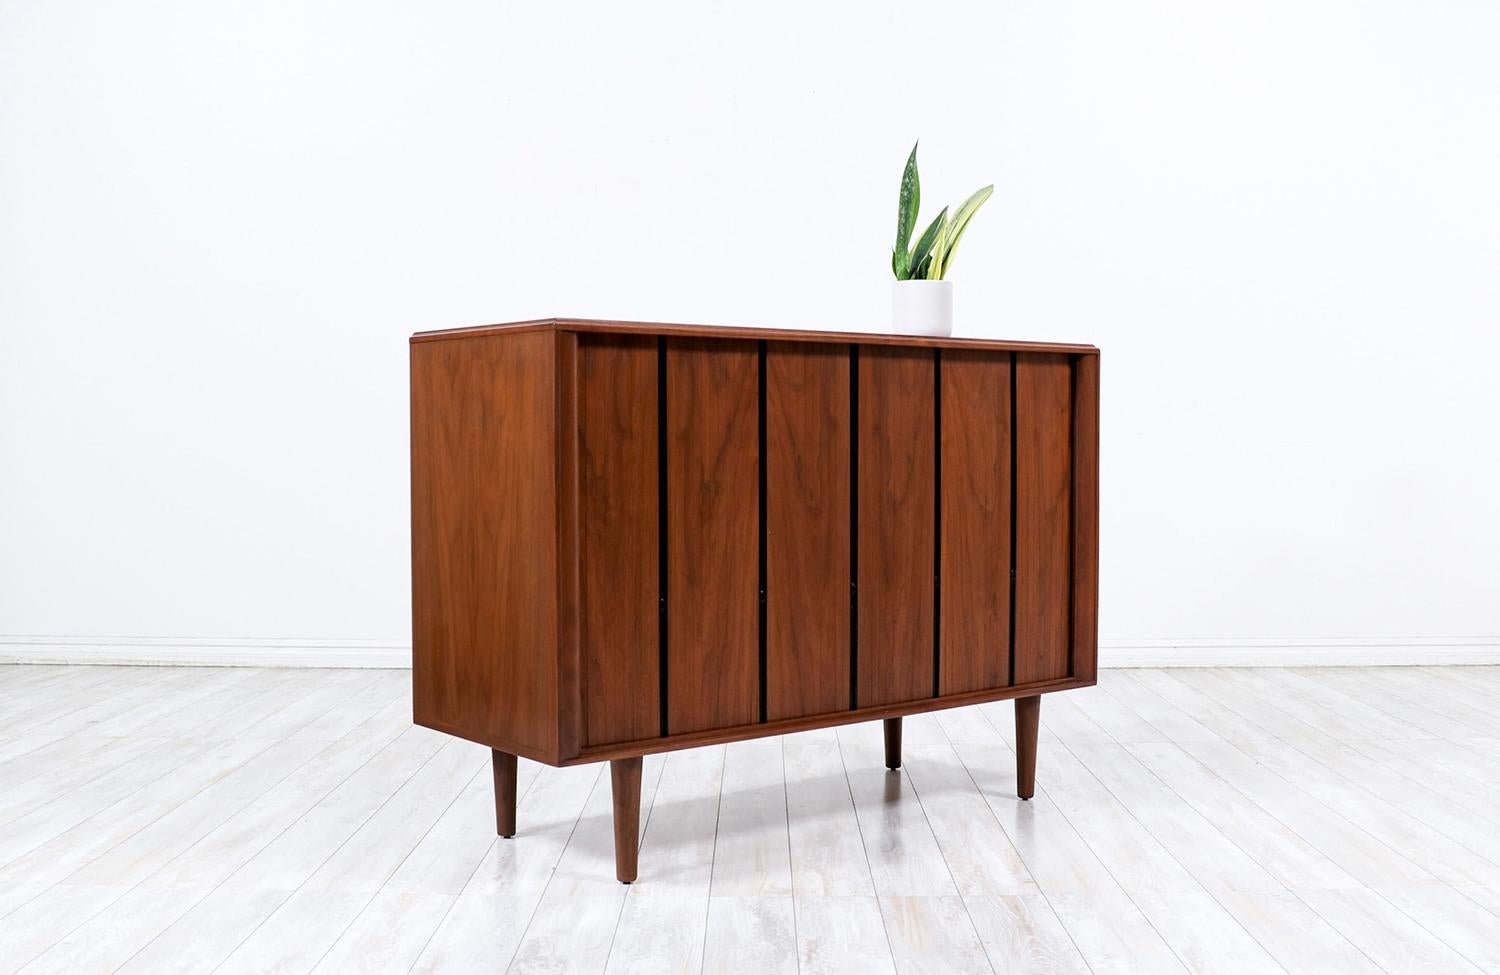 Transforming a piece of Mid-Century Modern furniture is like bringing history back to life, and we take this journey with passion and precision. With over 17 years of artisanal expertise, our Los Angeles studio is a haven where vintage treasures are